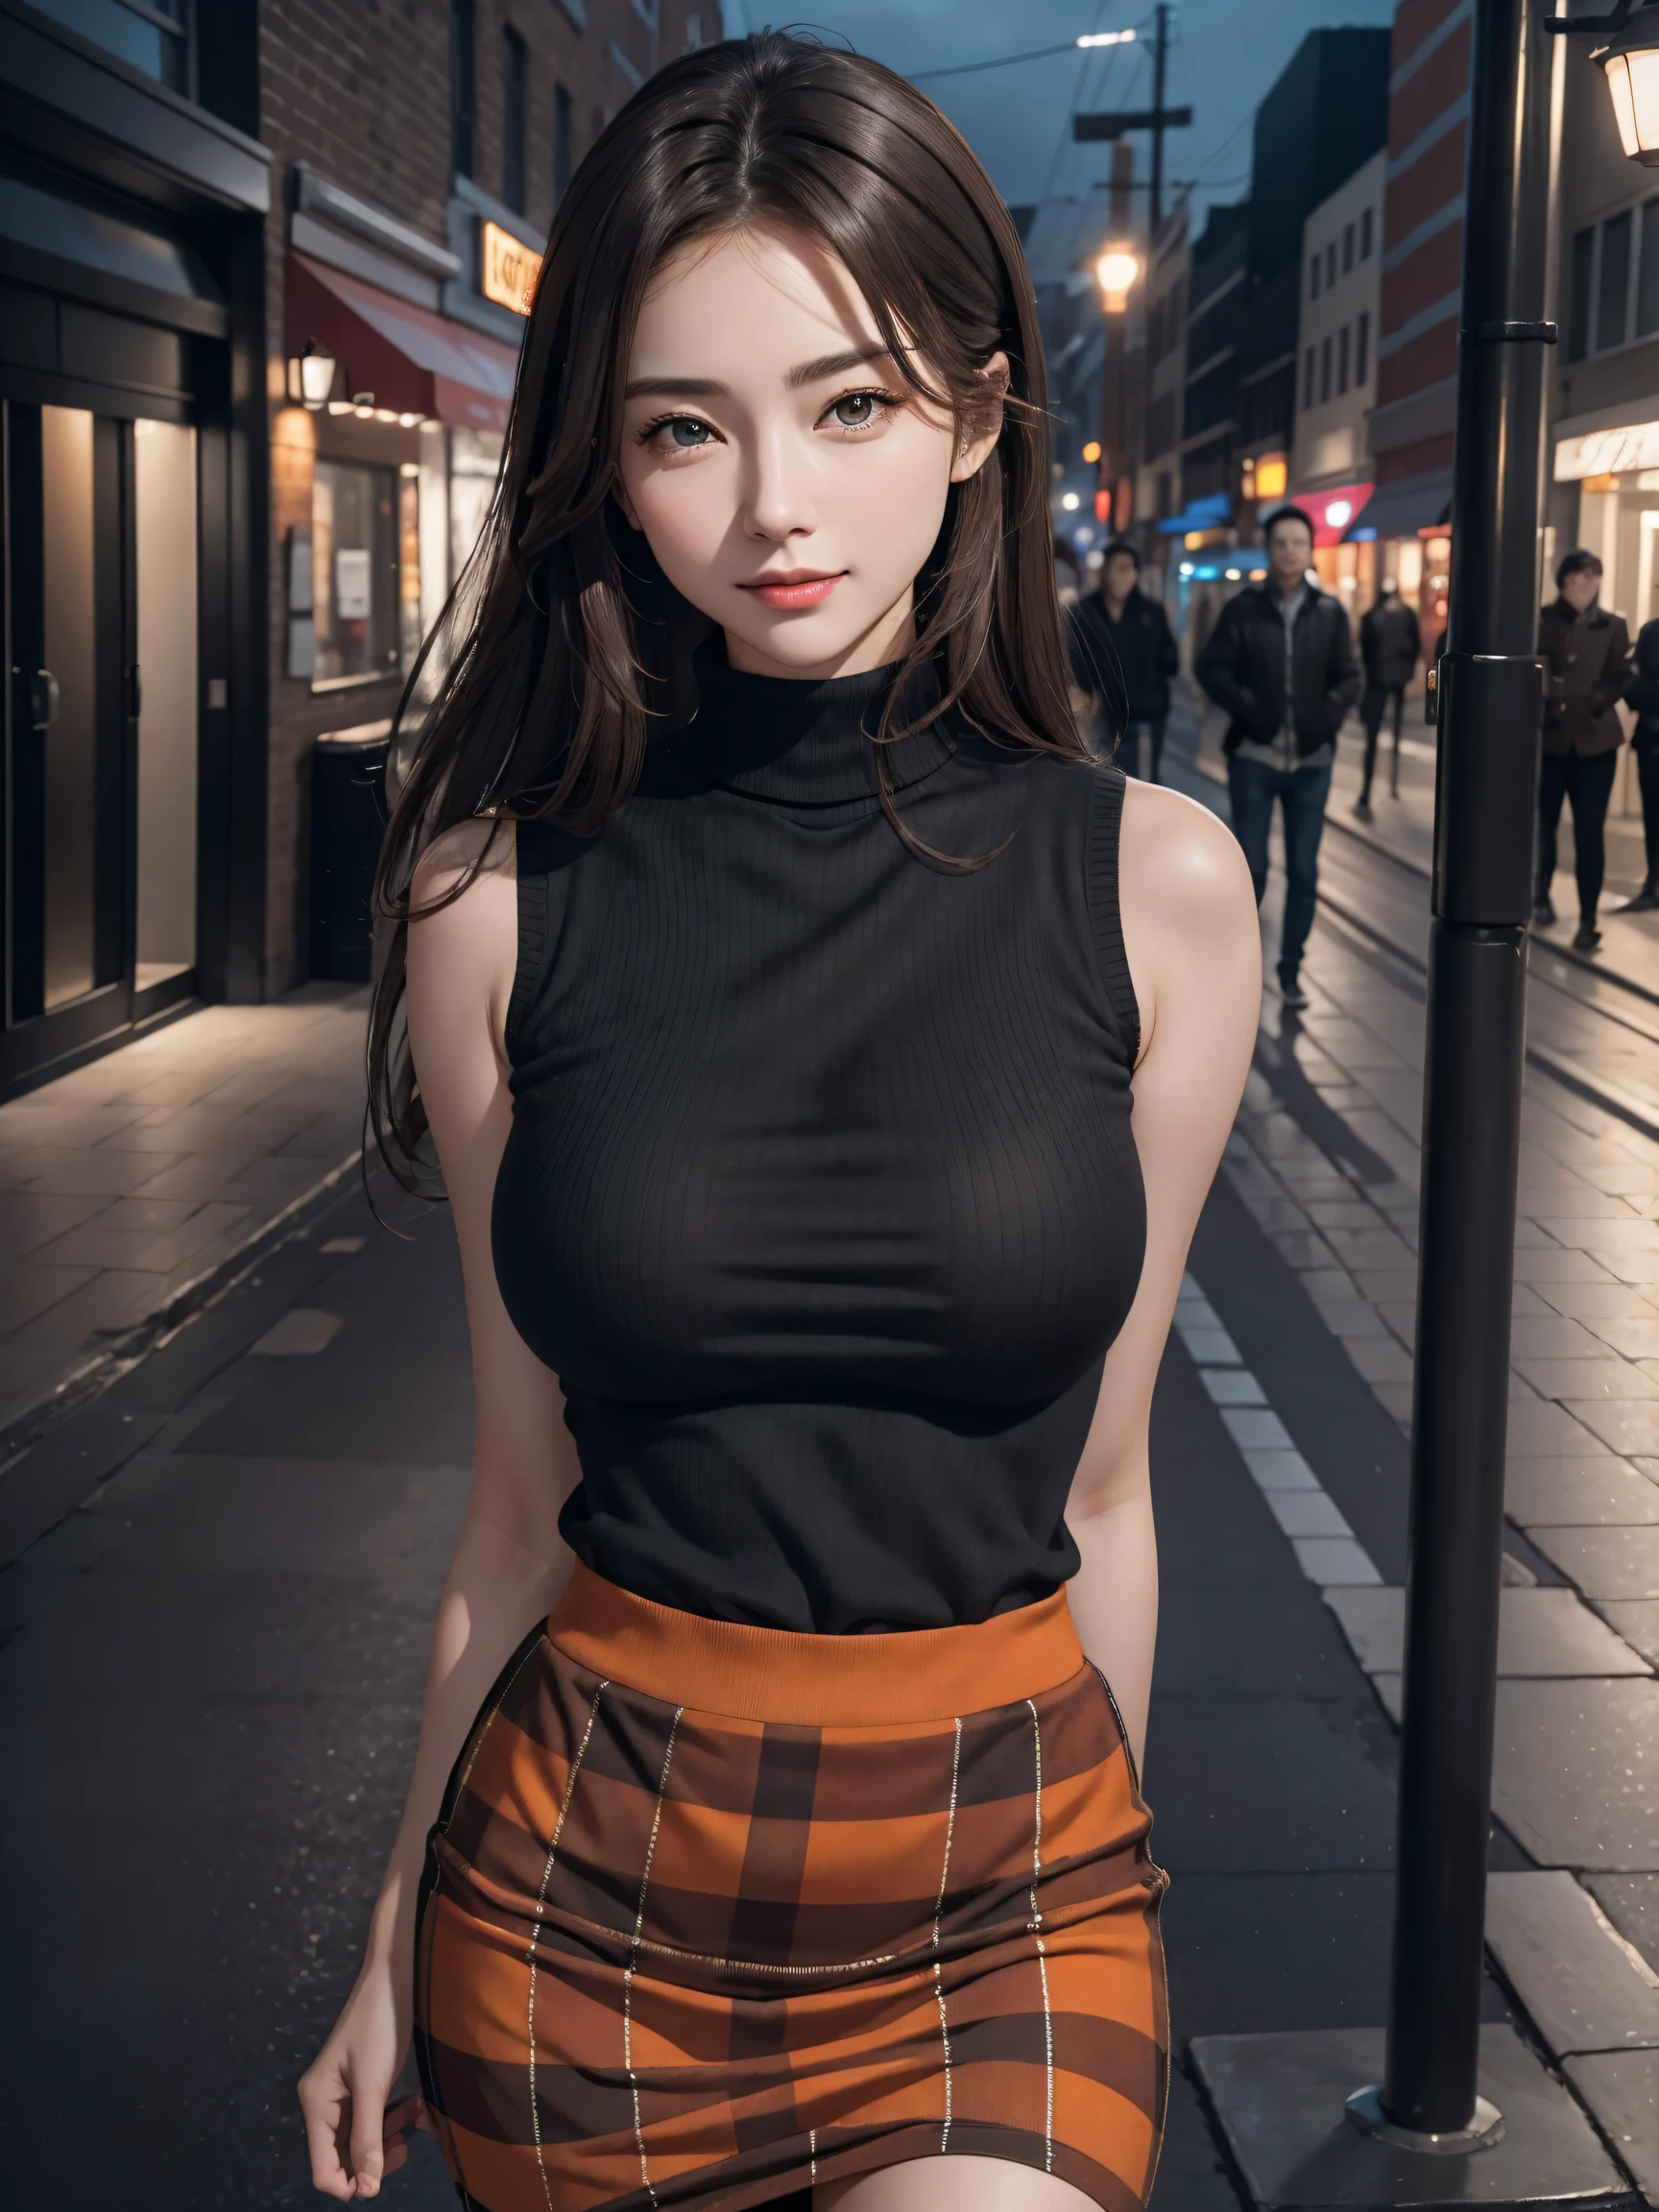 photorealistic, masterpiece, best quality, raw photo, night situation:1.5, at street side, dark street, 
BREAK,
1girl, biggest breasts:1.38, gigantic breasts:1.38, disproportionate breasts:1.38, medium-length hair, brown hair, (extremely pretty and beautiful Japanese actress face:1.3, Korean actress face:1.3, beautiful clean face), 
BREAK, 
attractive look, shiny-orange turtleneck sweater, sleeveless, black plaid-pattern-skirt,   
BREAK, 
looking at viewer, standing at the wall, attractive posing, seductive smile, :d, cinematic lighting, at night, in the dark, deep shadow, at night, natural shading, low key, intricate detail, detailed skin, pore, highres, hdr, 4k, realistic,